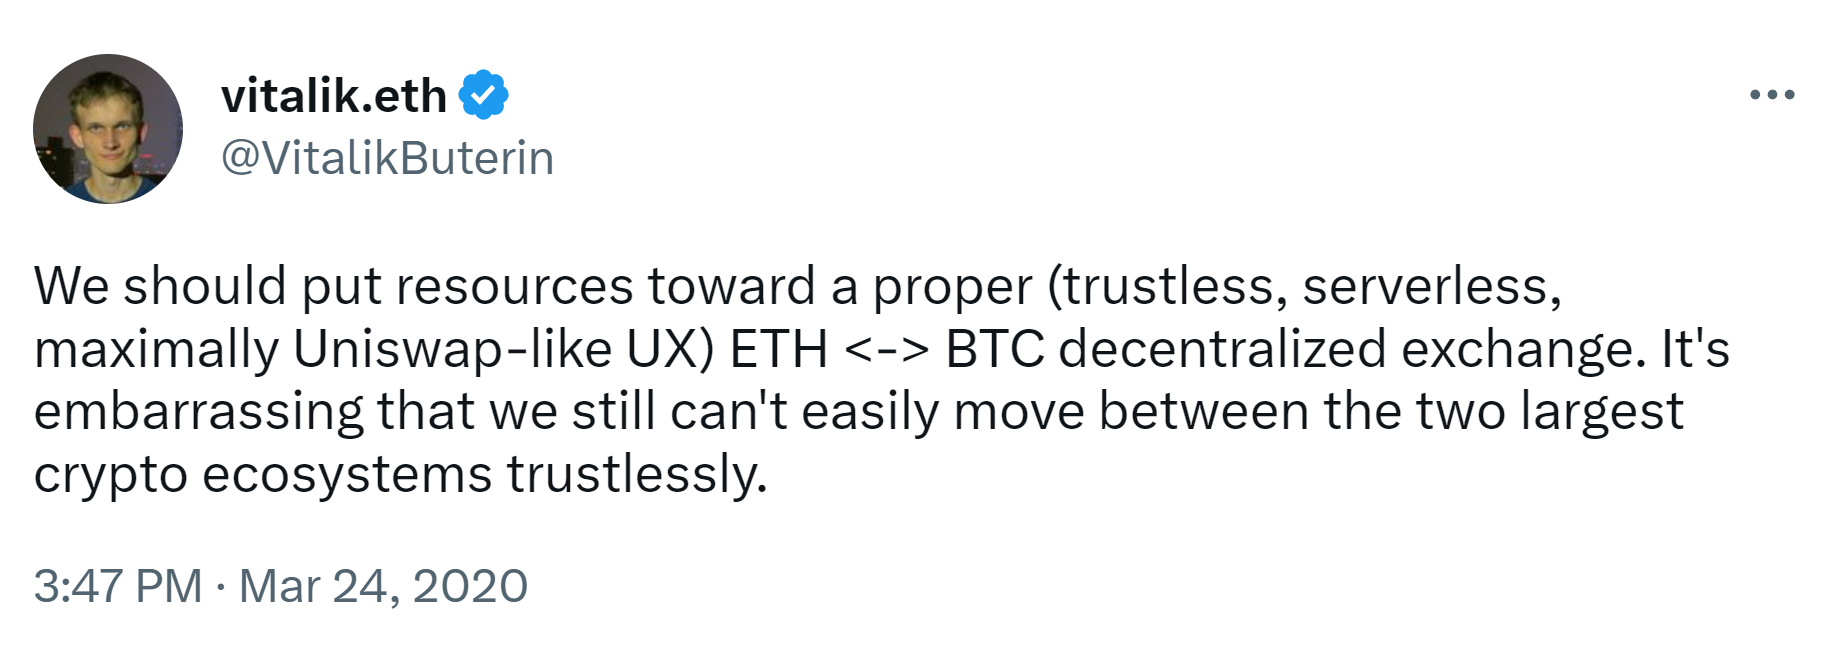 Vitalik Buterin tweet saying its embarrassing we don't have a true decentralized exchange to swap bitcoin and ethereum